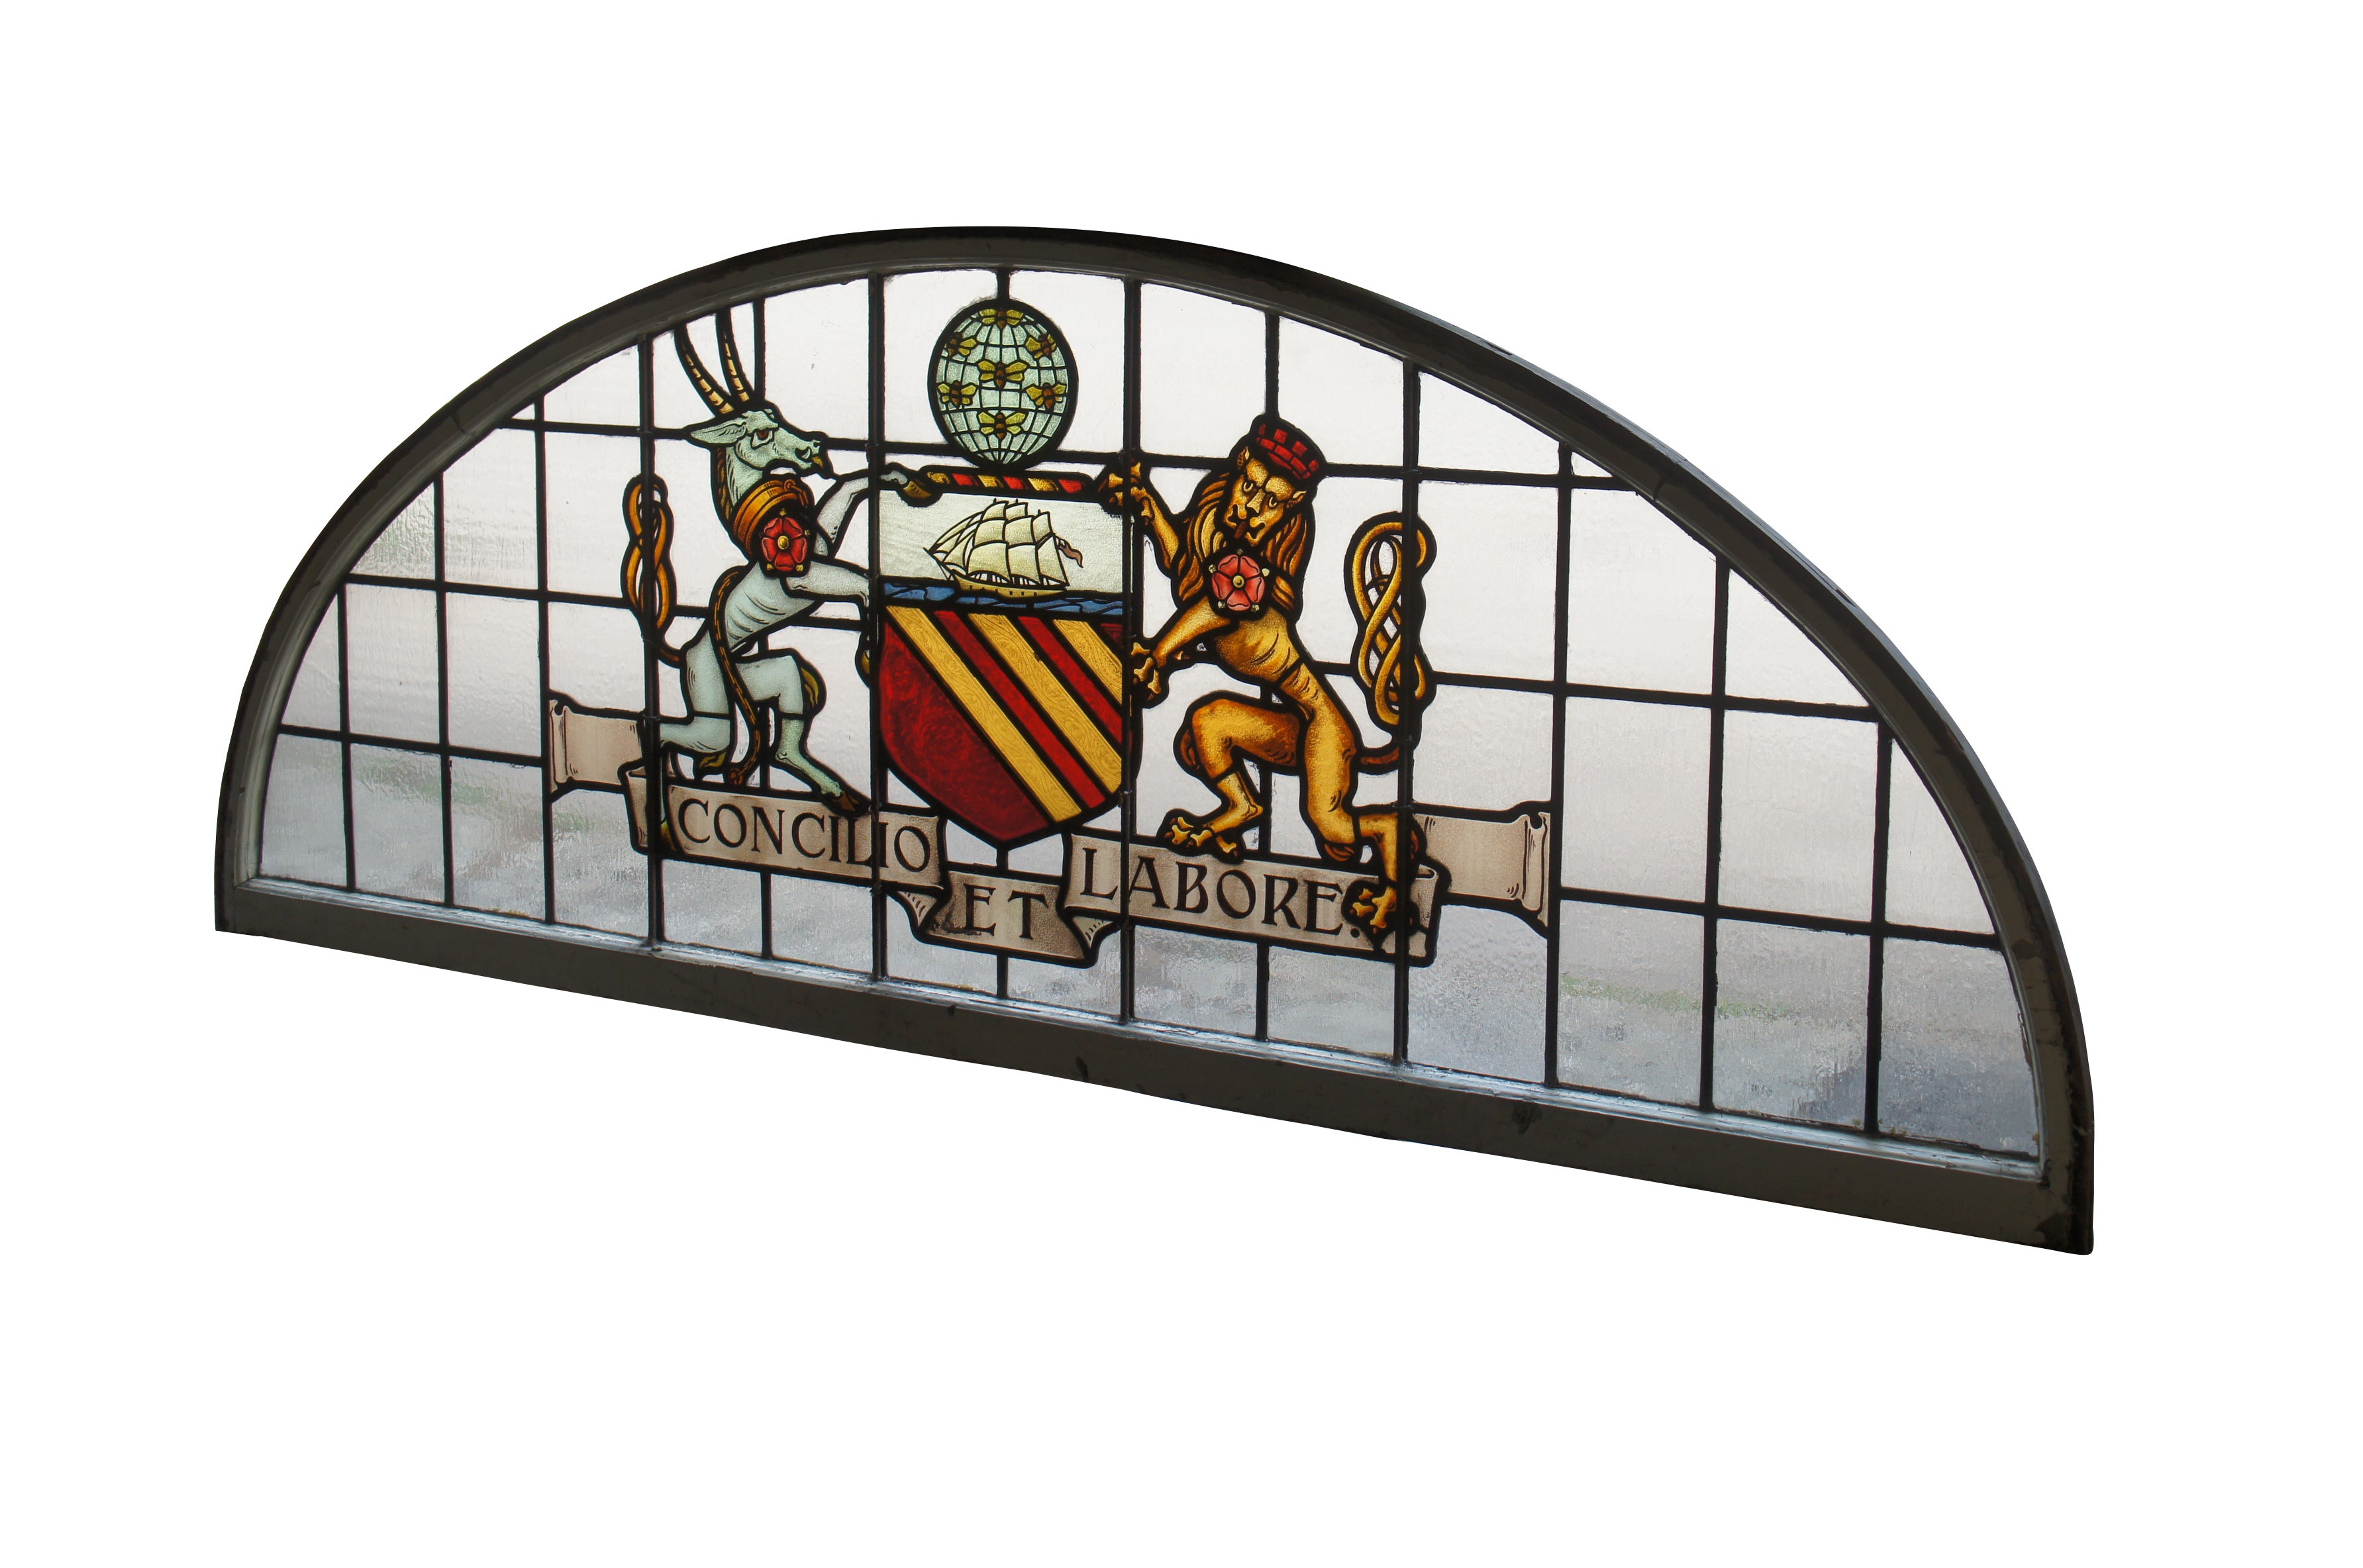 A fantastic very large pair of exceedingly rare leaded stained glass Palladian window panels, circa late 19th century.  Features the Manchester England Coat of Arms, aptly titled 'Concilio et Labore' translated to 'By Counsel and Work' or 'Wisdom